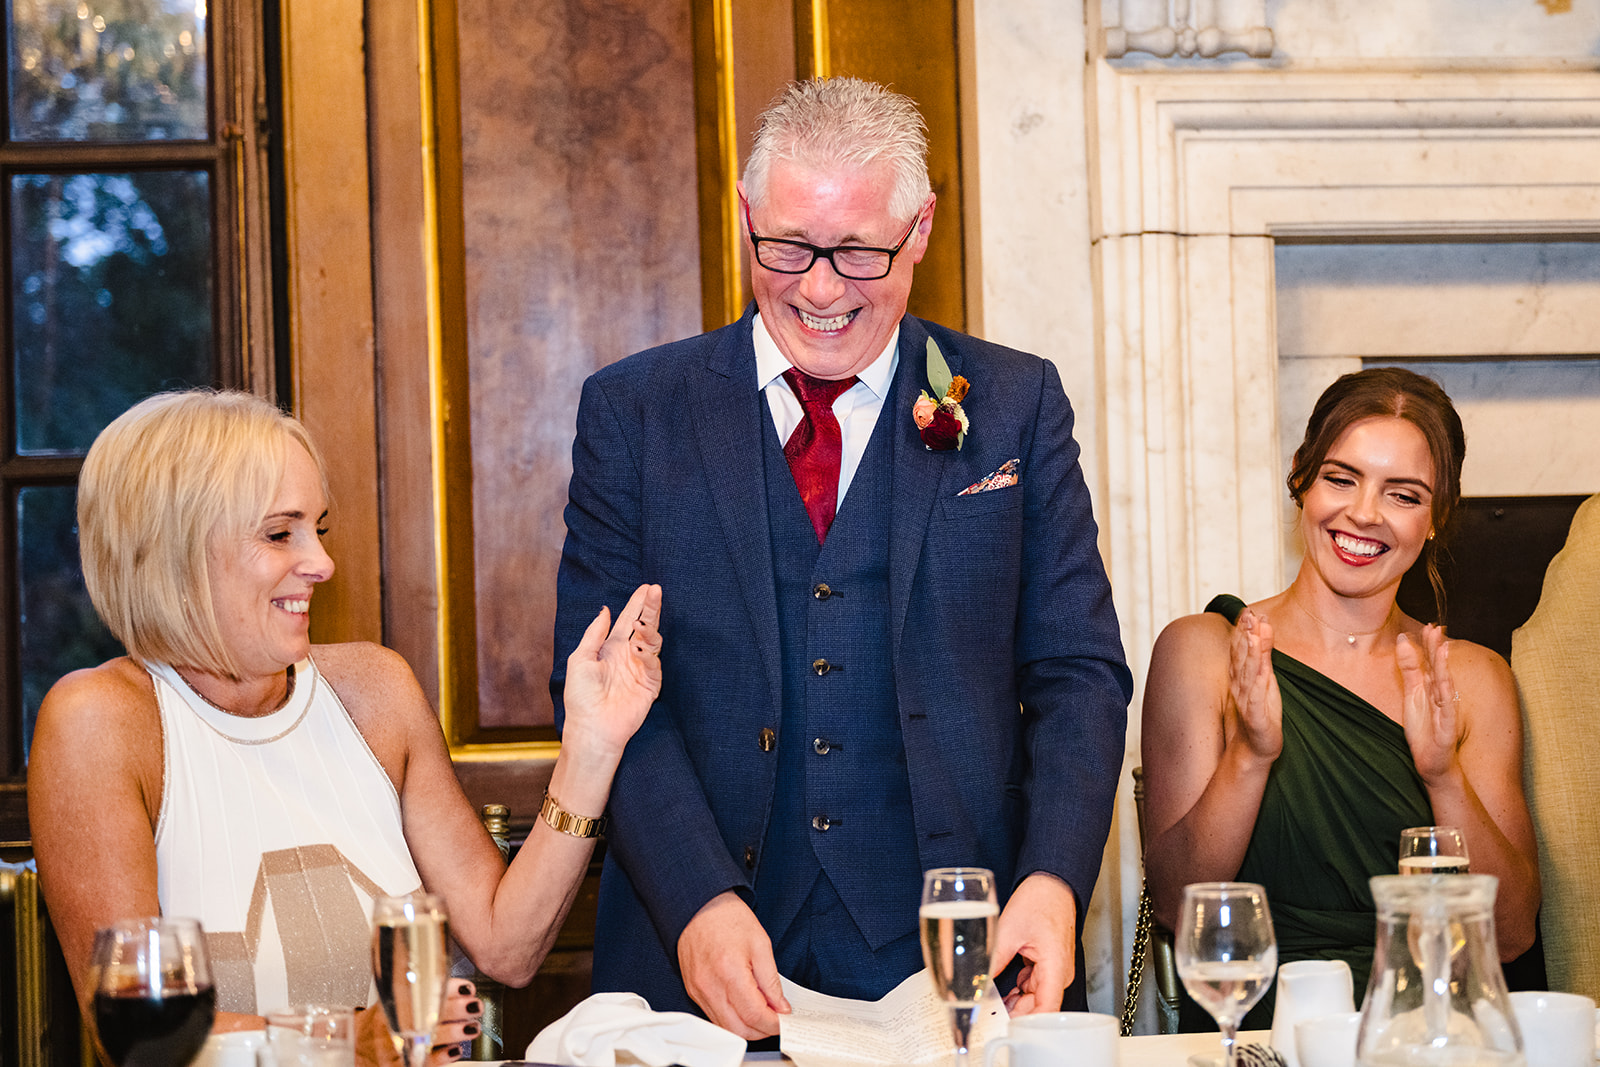 Father of the bride speech at gosfield hall wedding venue